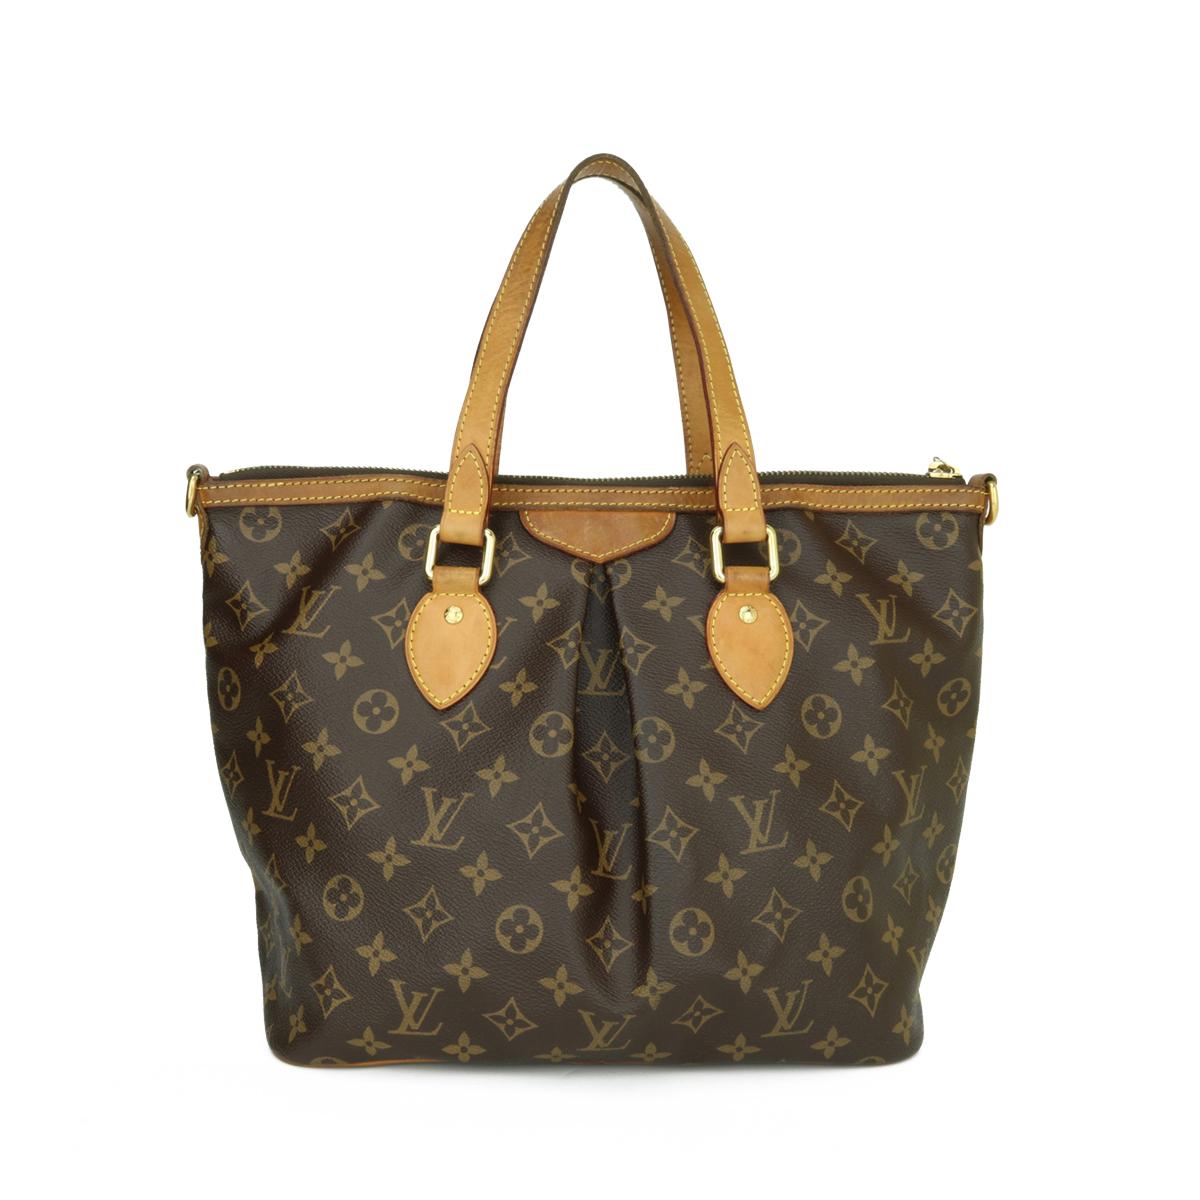 Louis Vuitton Palermo PM Bag in Monogram 2011.

This bag is in good condition. 

- Exterior Condition: Good condition. Light storage creasing to the canvas. The outside of the bag shows signs of wear - leather/print surface rubbing to four base